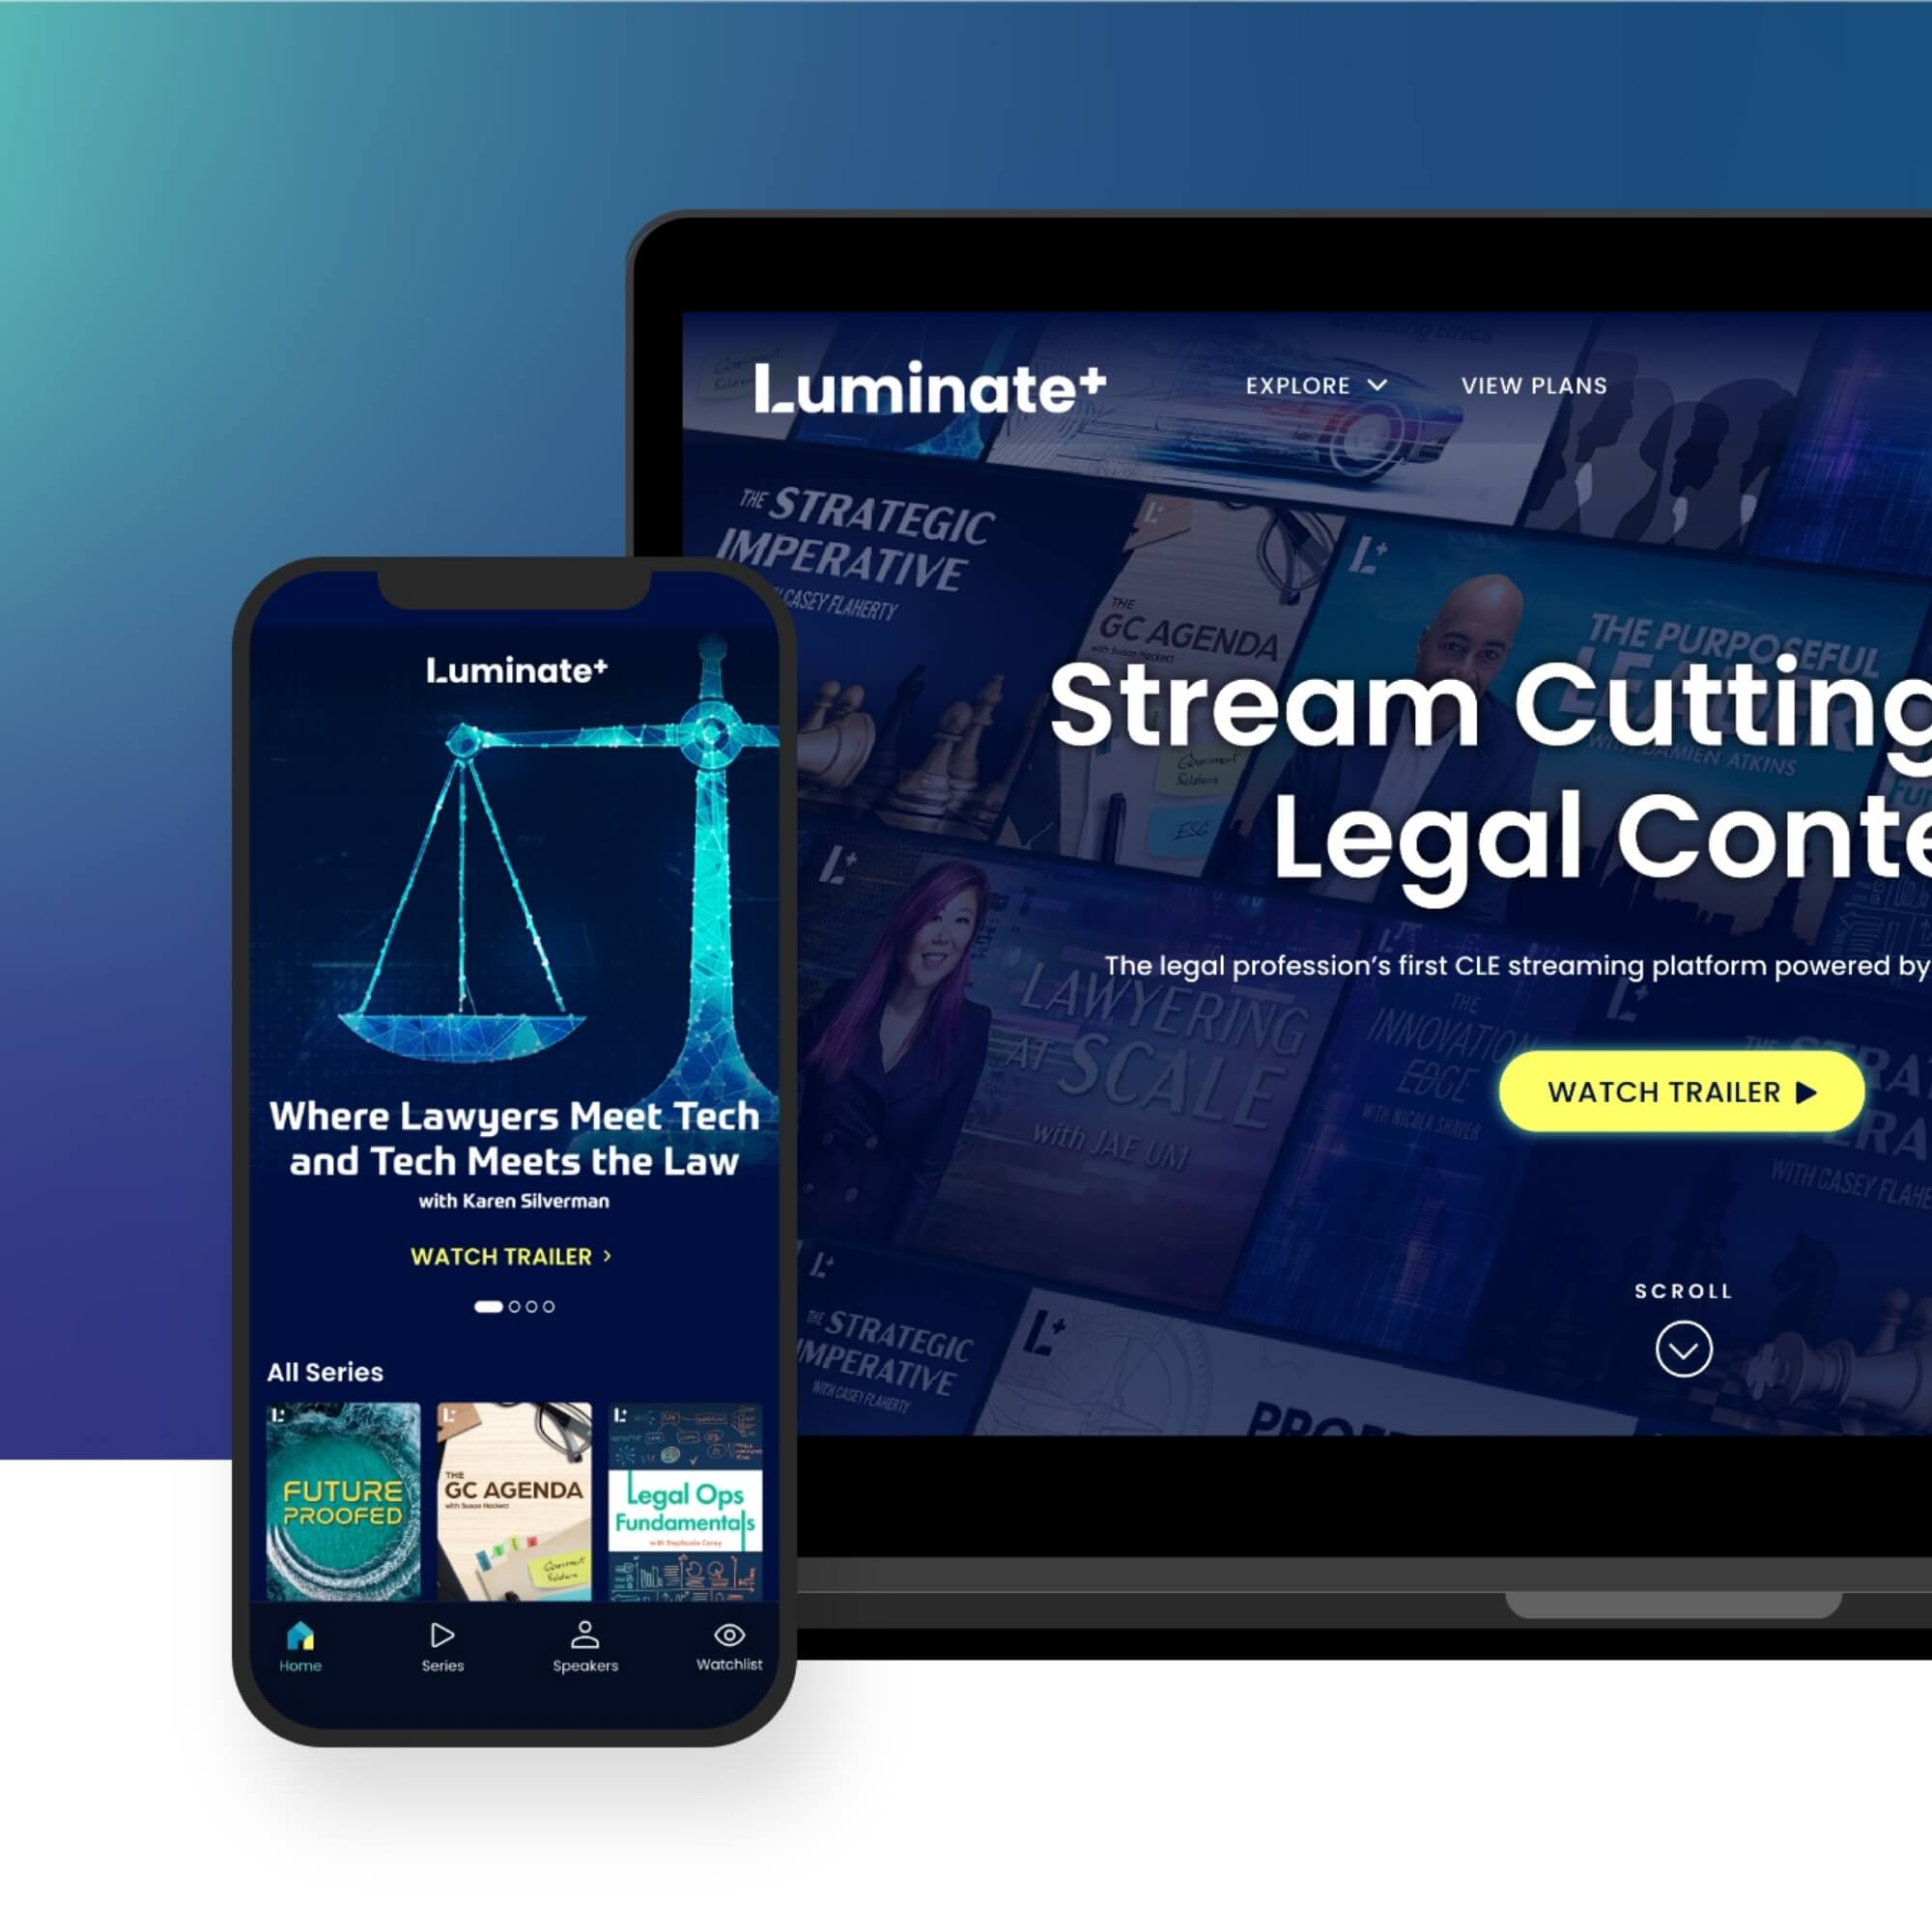 A STREAMING PLATFORM FOR THE LEGAL PROFESSION